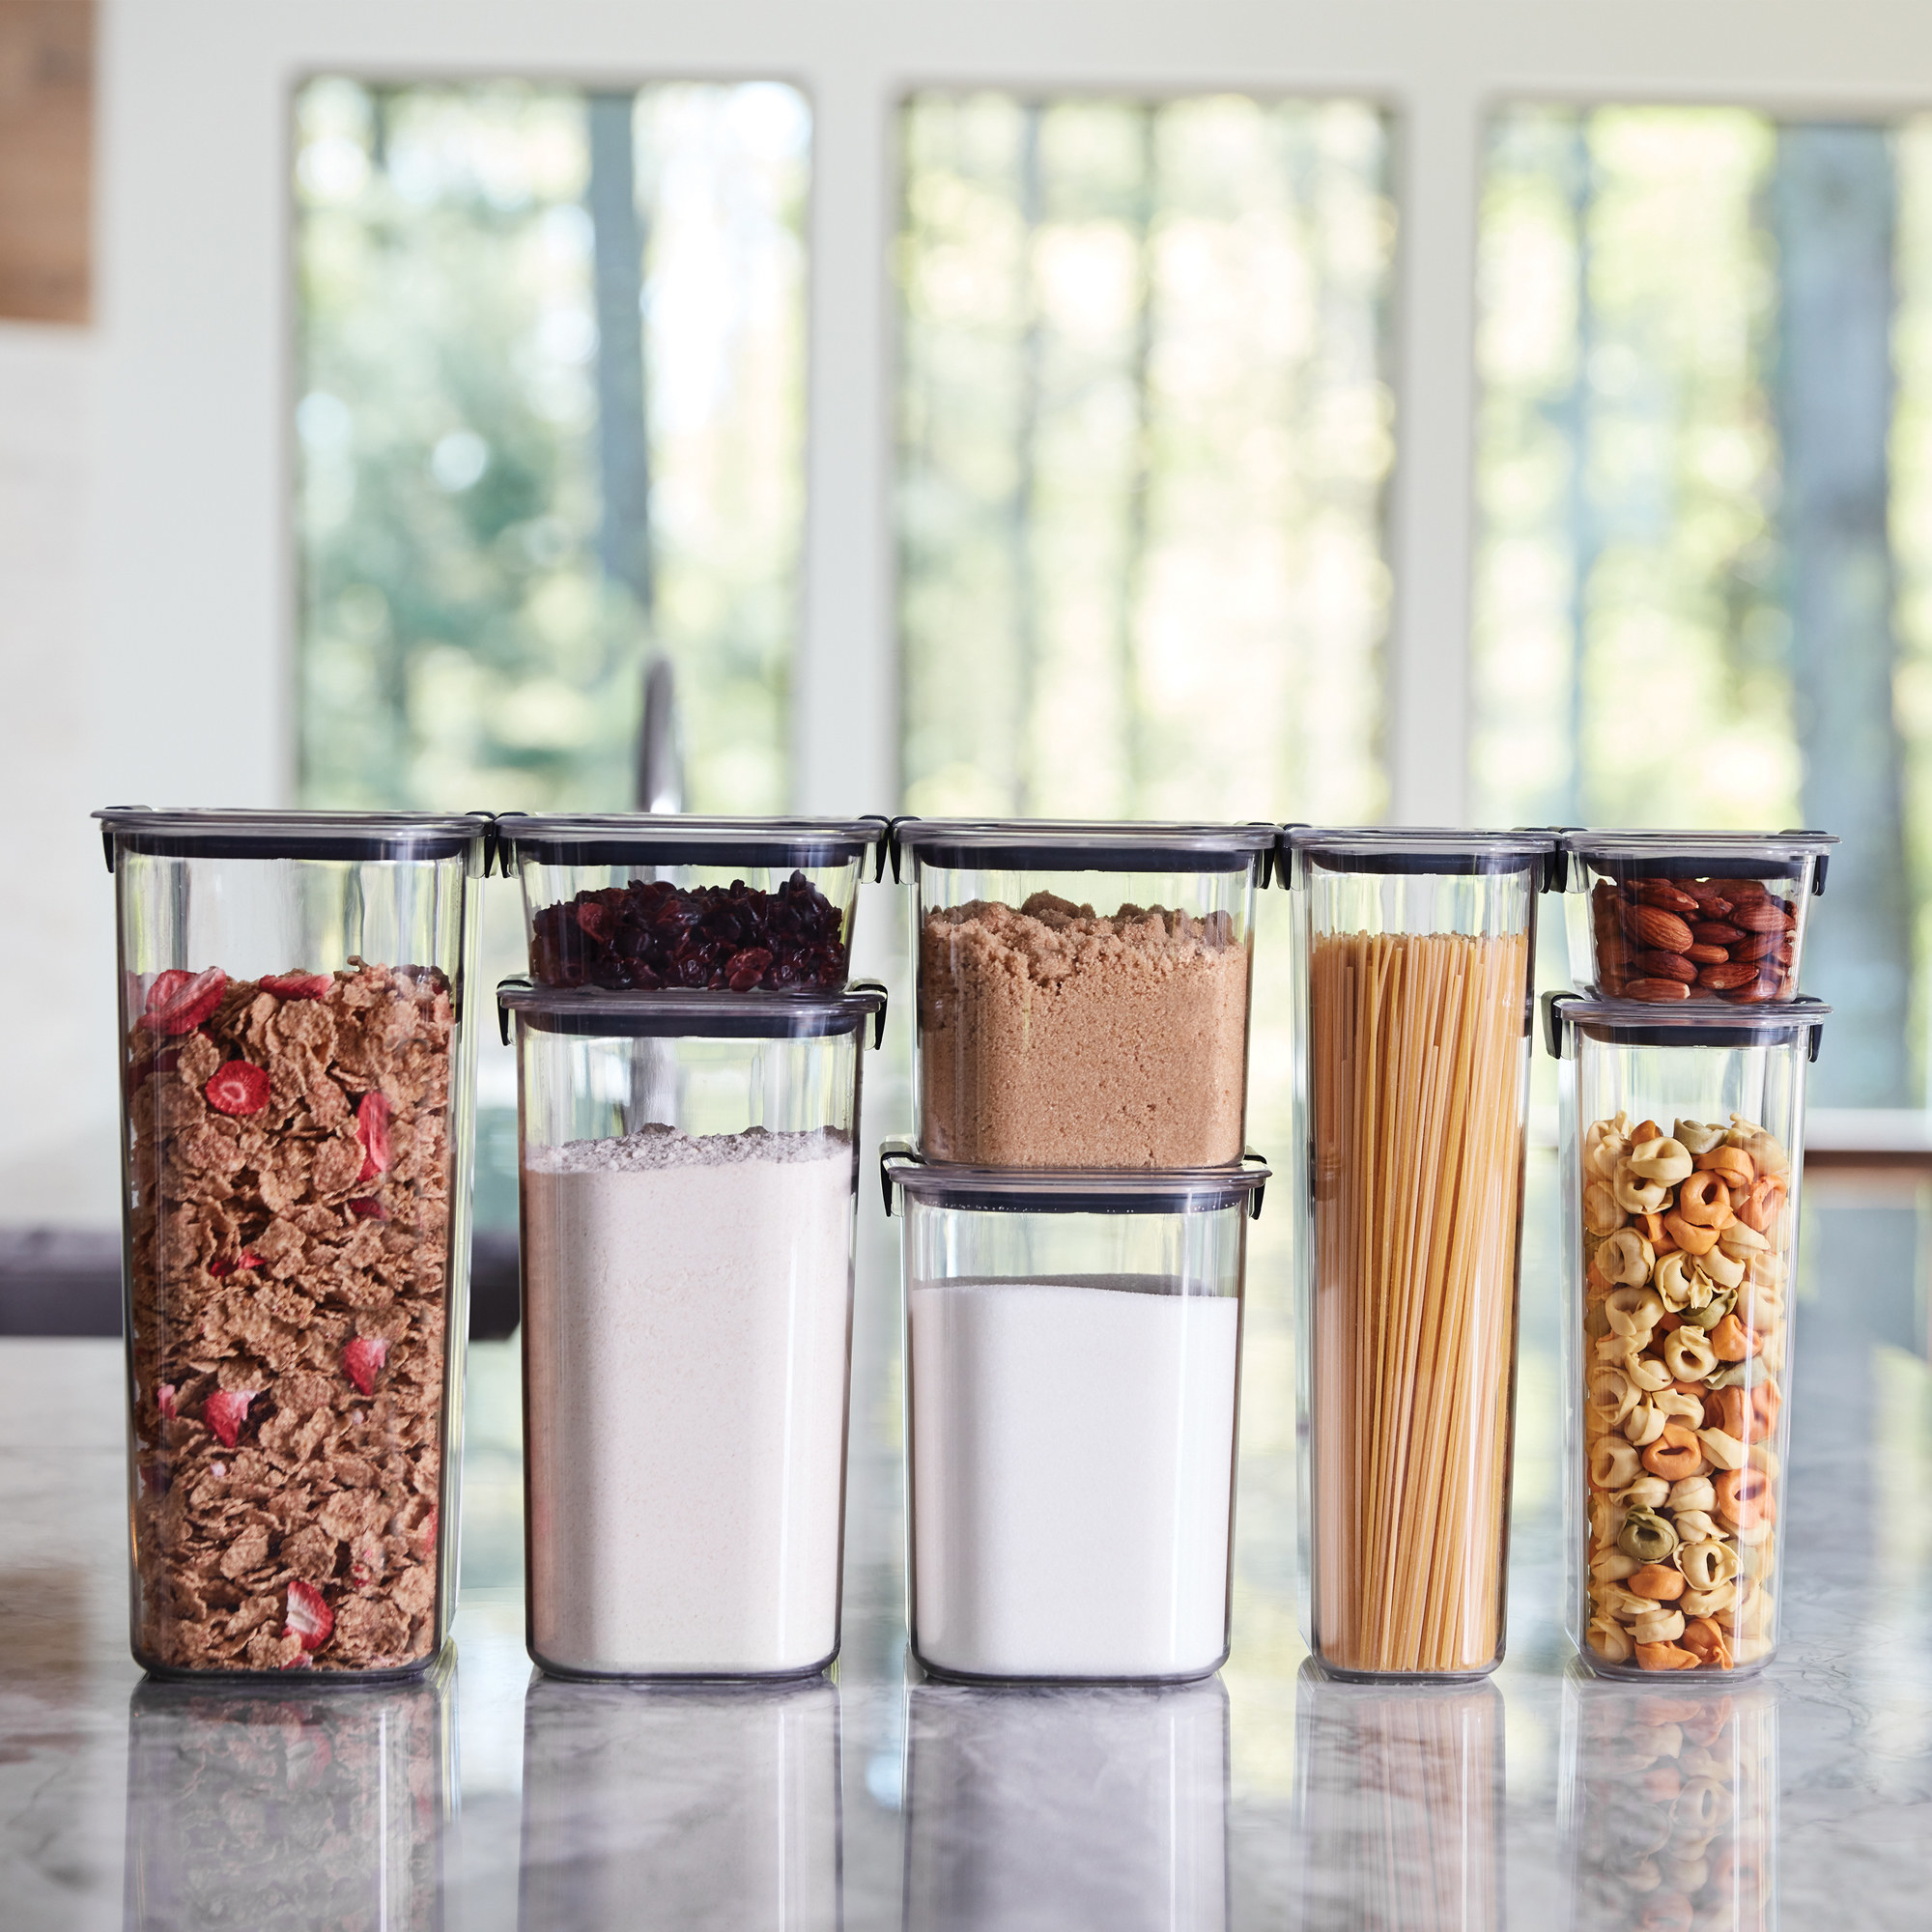 clear food storage containers filled with various dry foods like cereal, flour, and pasta